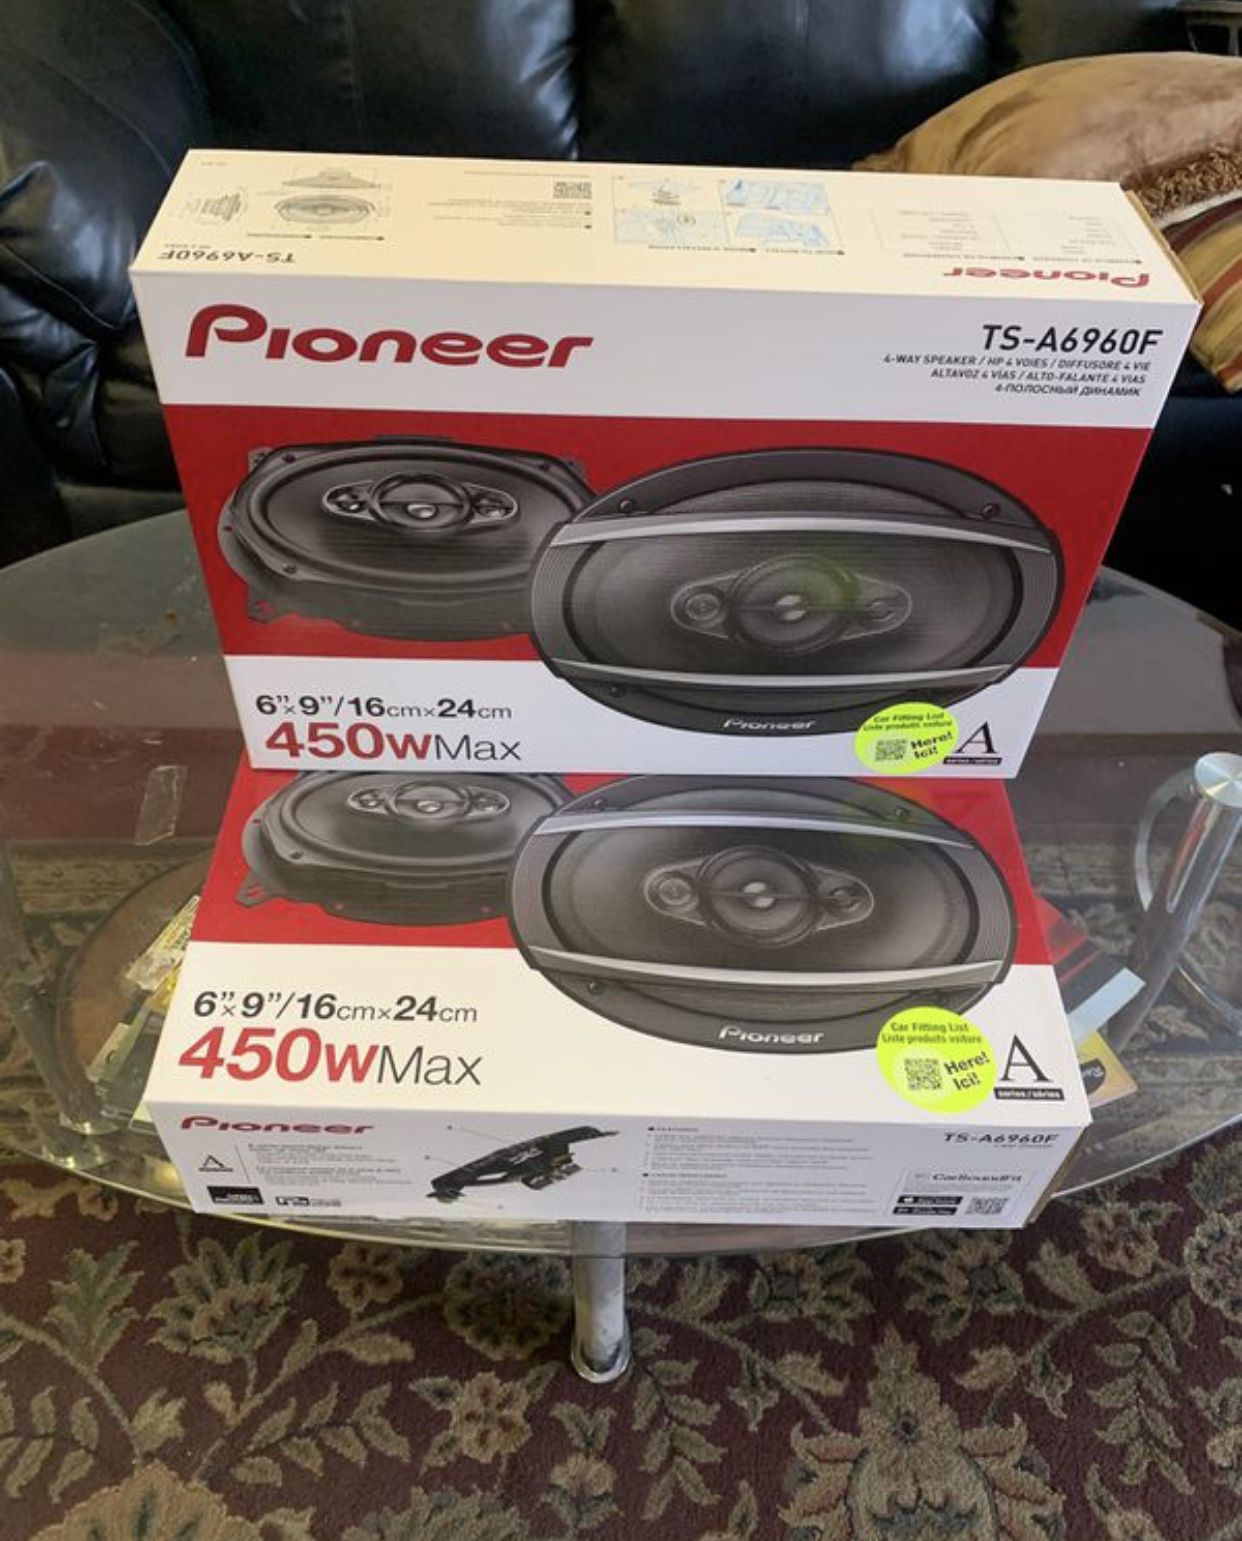 Pioneer Car Audio . 6x9 Car Stereo Speakers 450 Watts . Holiday Super Sale . $55 A Pair While They Last . New